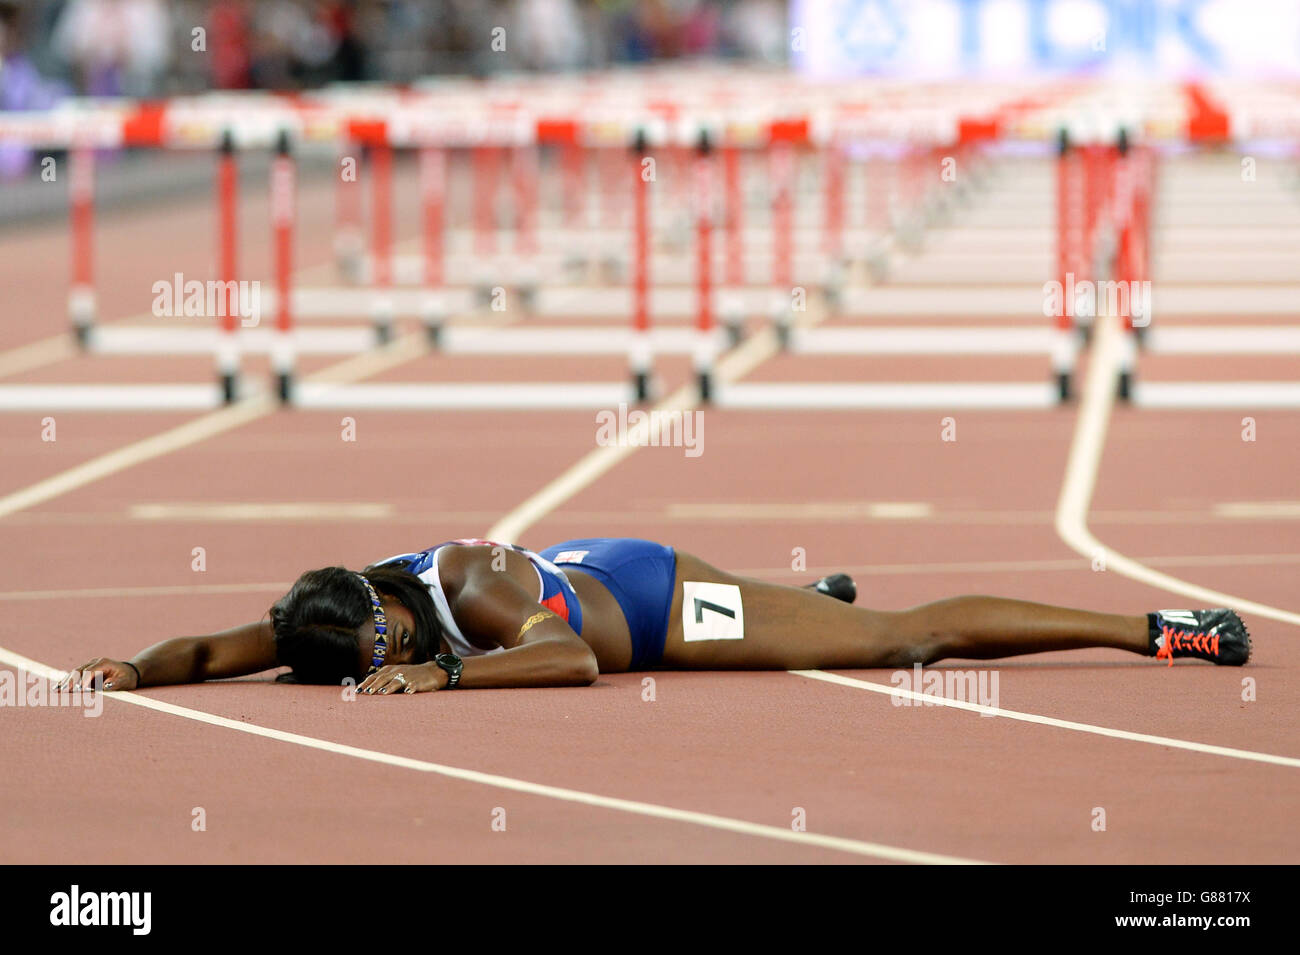 Great Britain's Tiffany Porter after stumbling as she crossed the finish line in the Women's 100m Hurdles Final during day seven of the IAAF World Championships at the Beijing National Stadium, China. Stock Photo